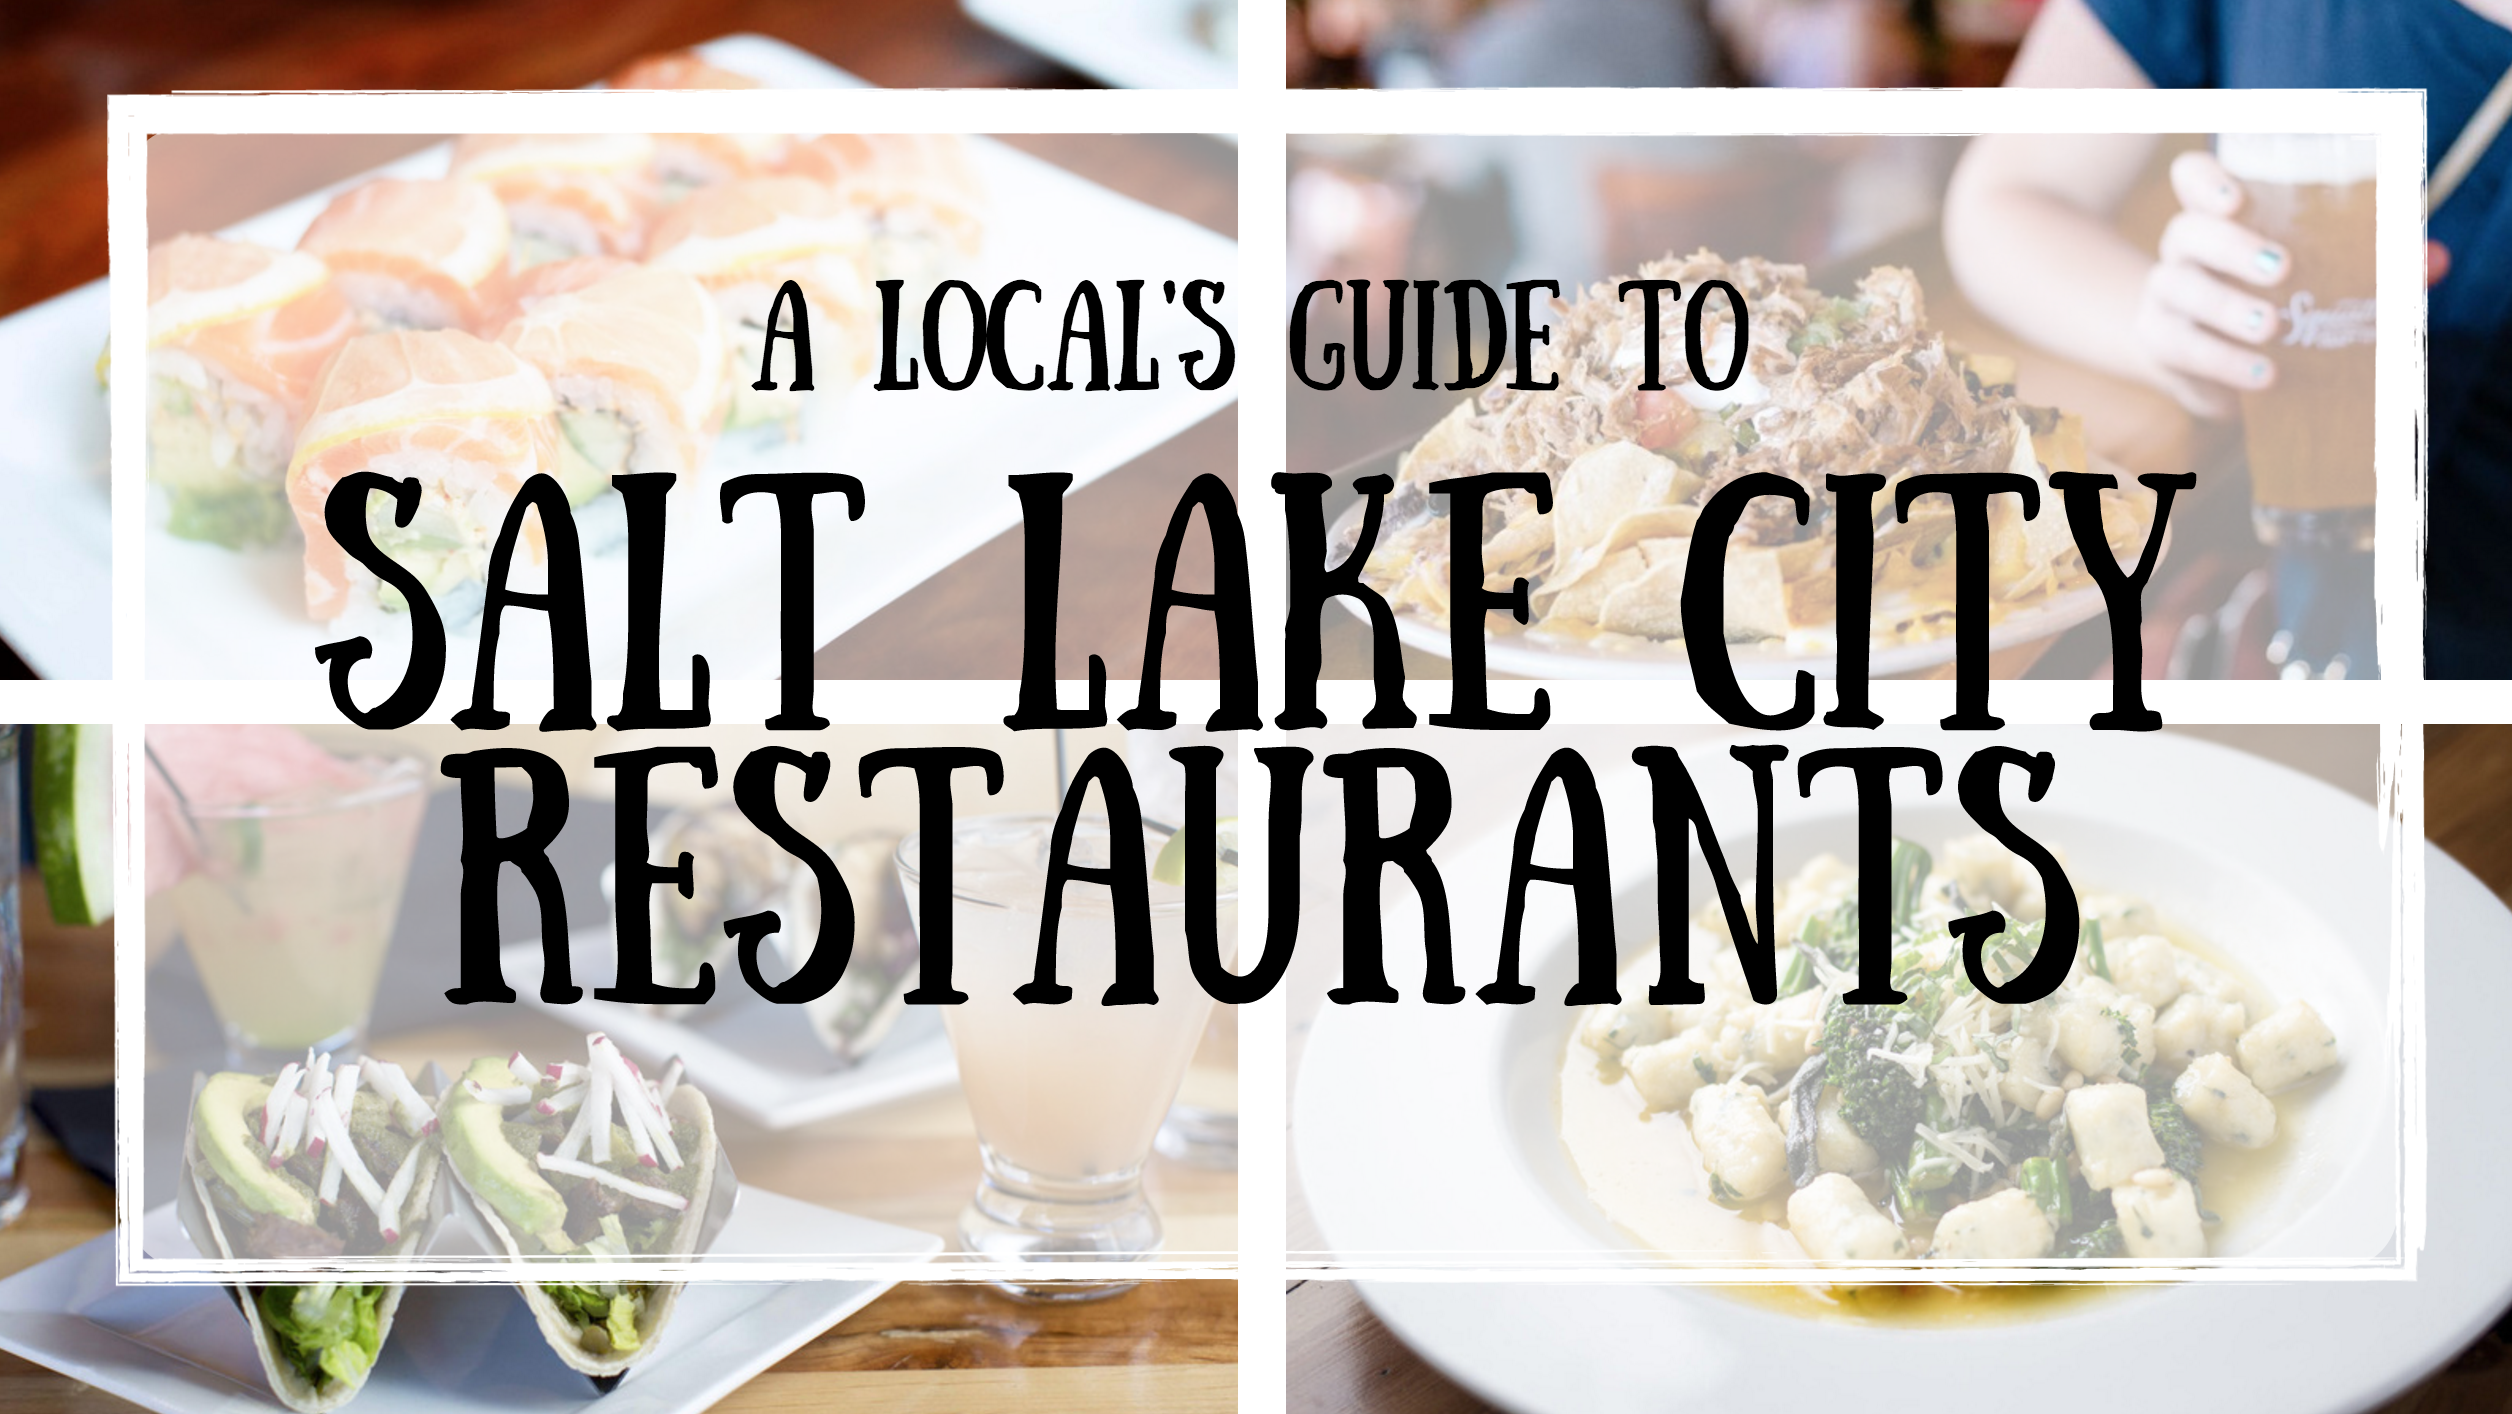 Restaurants in Salt Lake City: A Local’s Guide